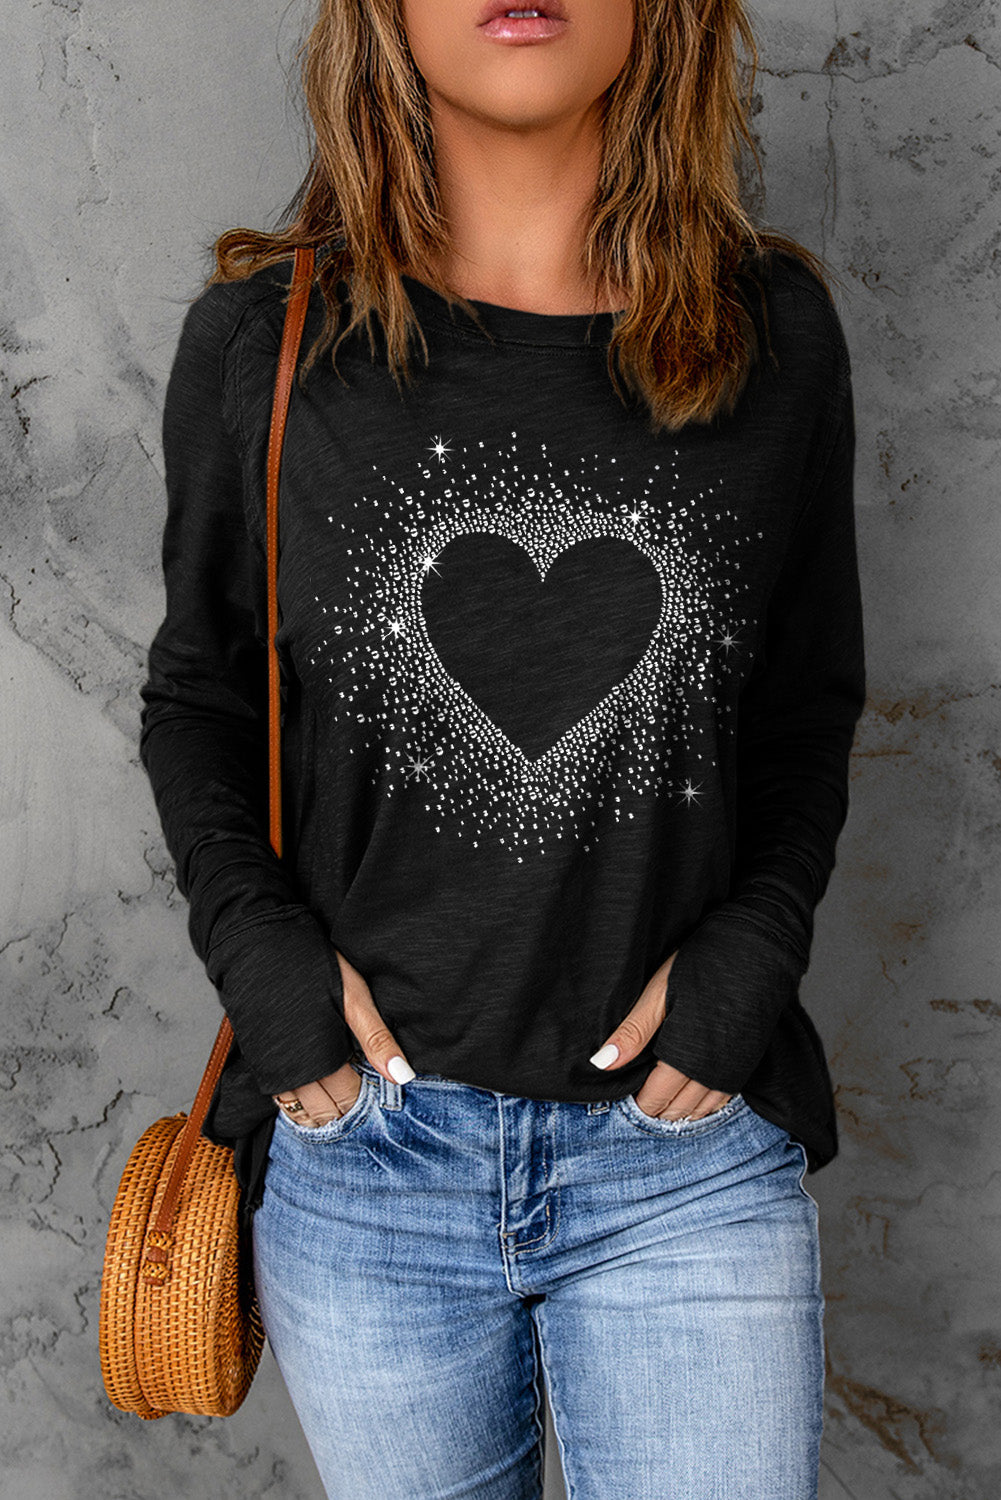 Let Me Adore You Graphic Long Sleeve Top